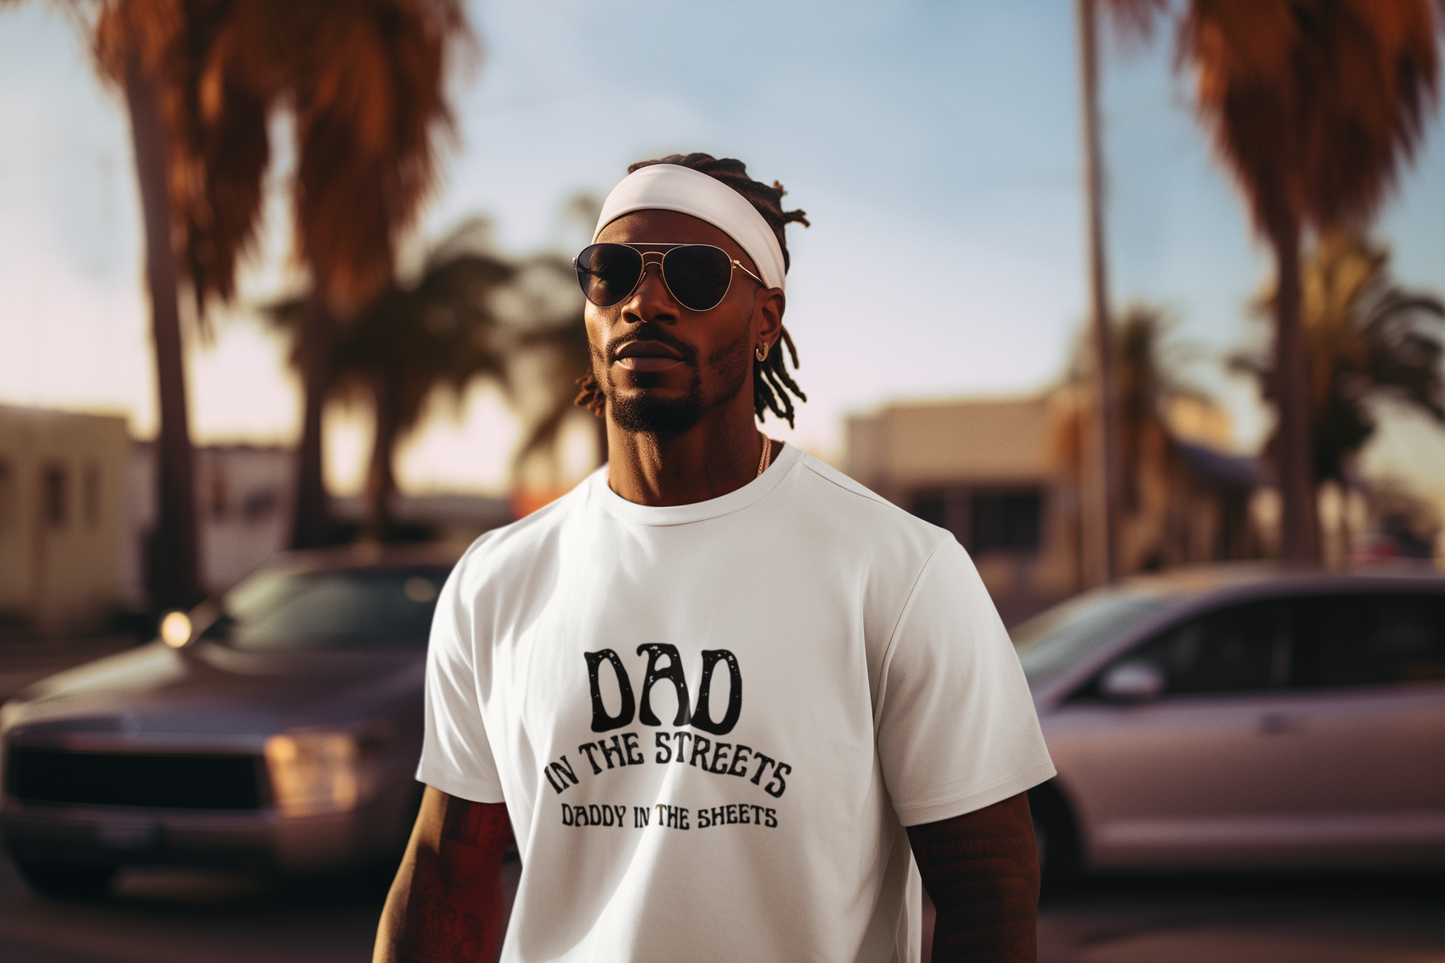 Daddy In The Sheets T-shirt